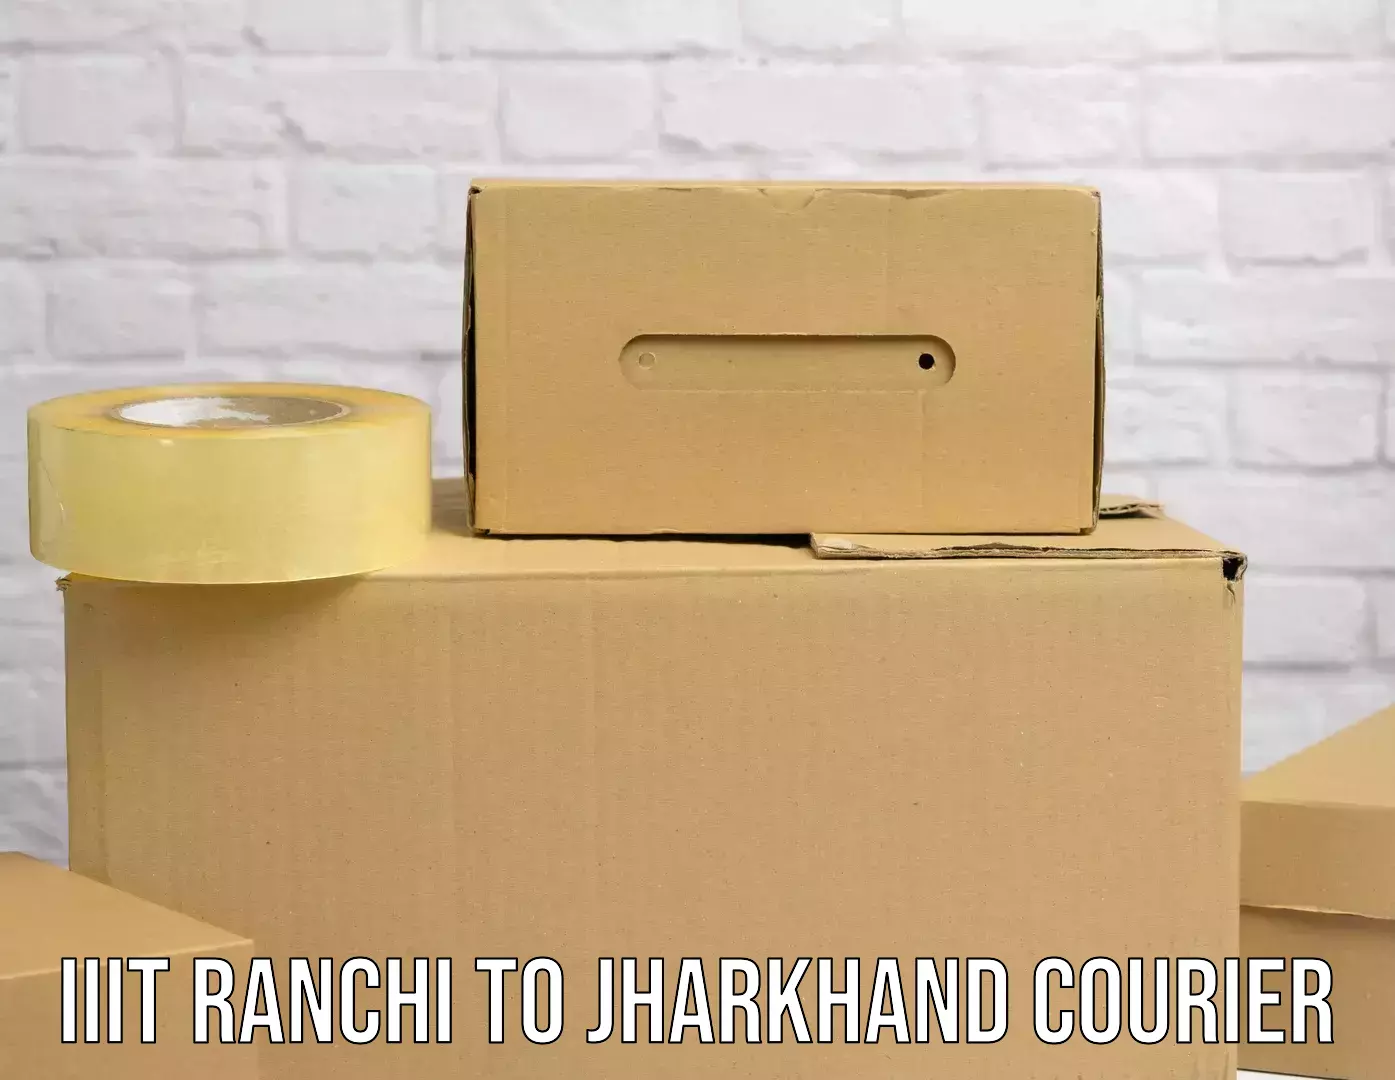 End-to-end delivery in IIIT Ranchi to Hazaribagh